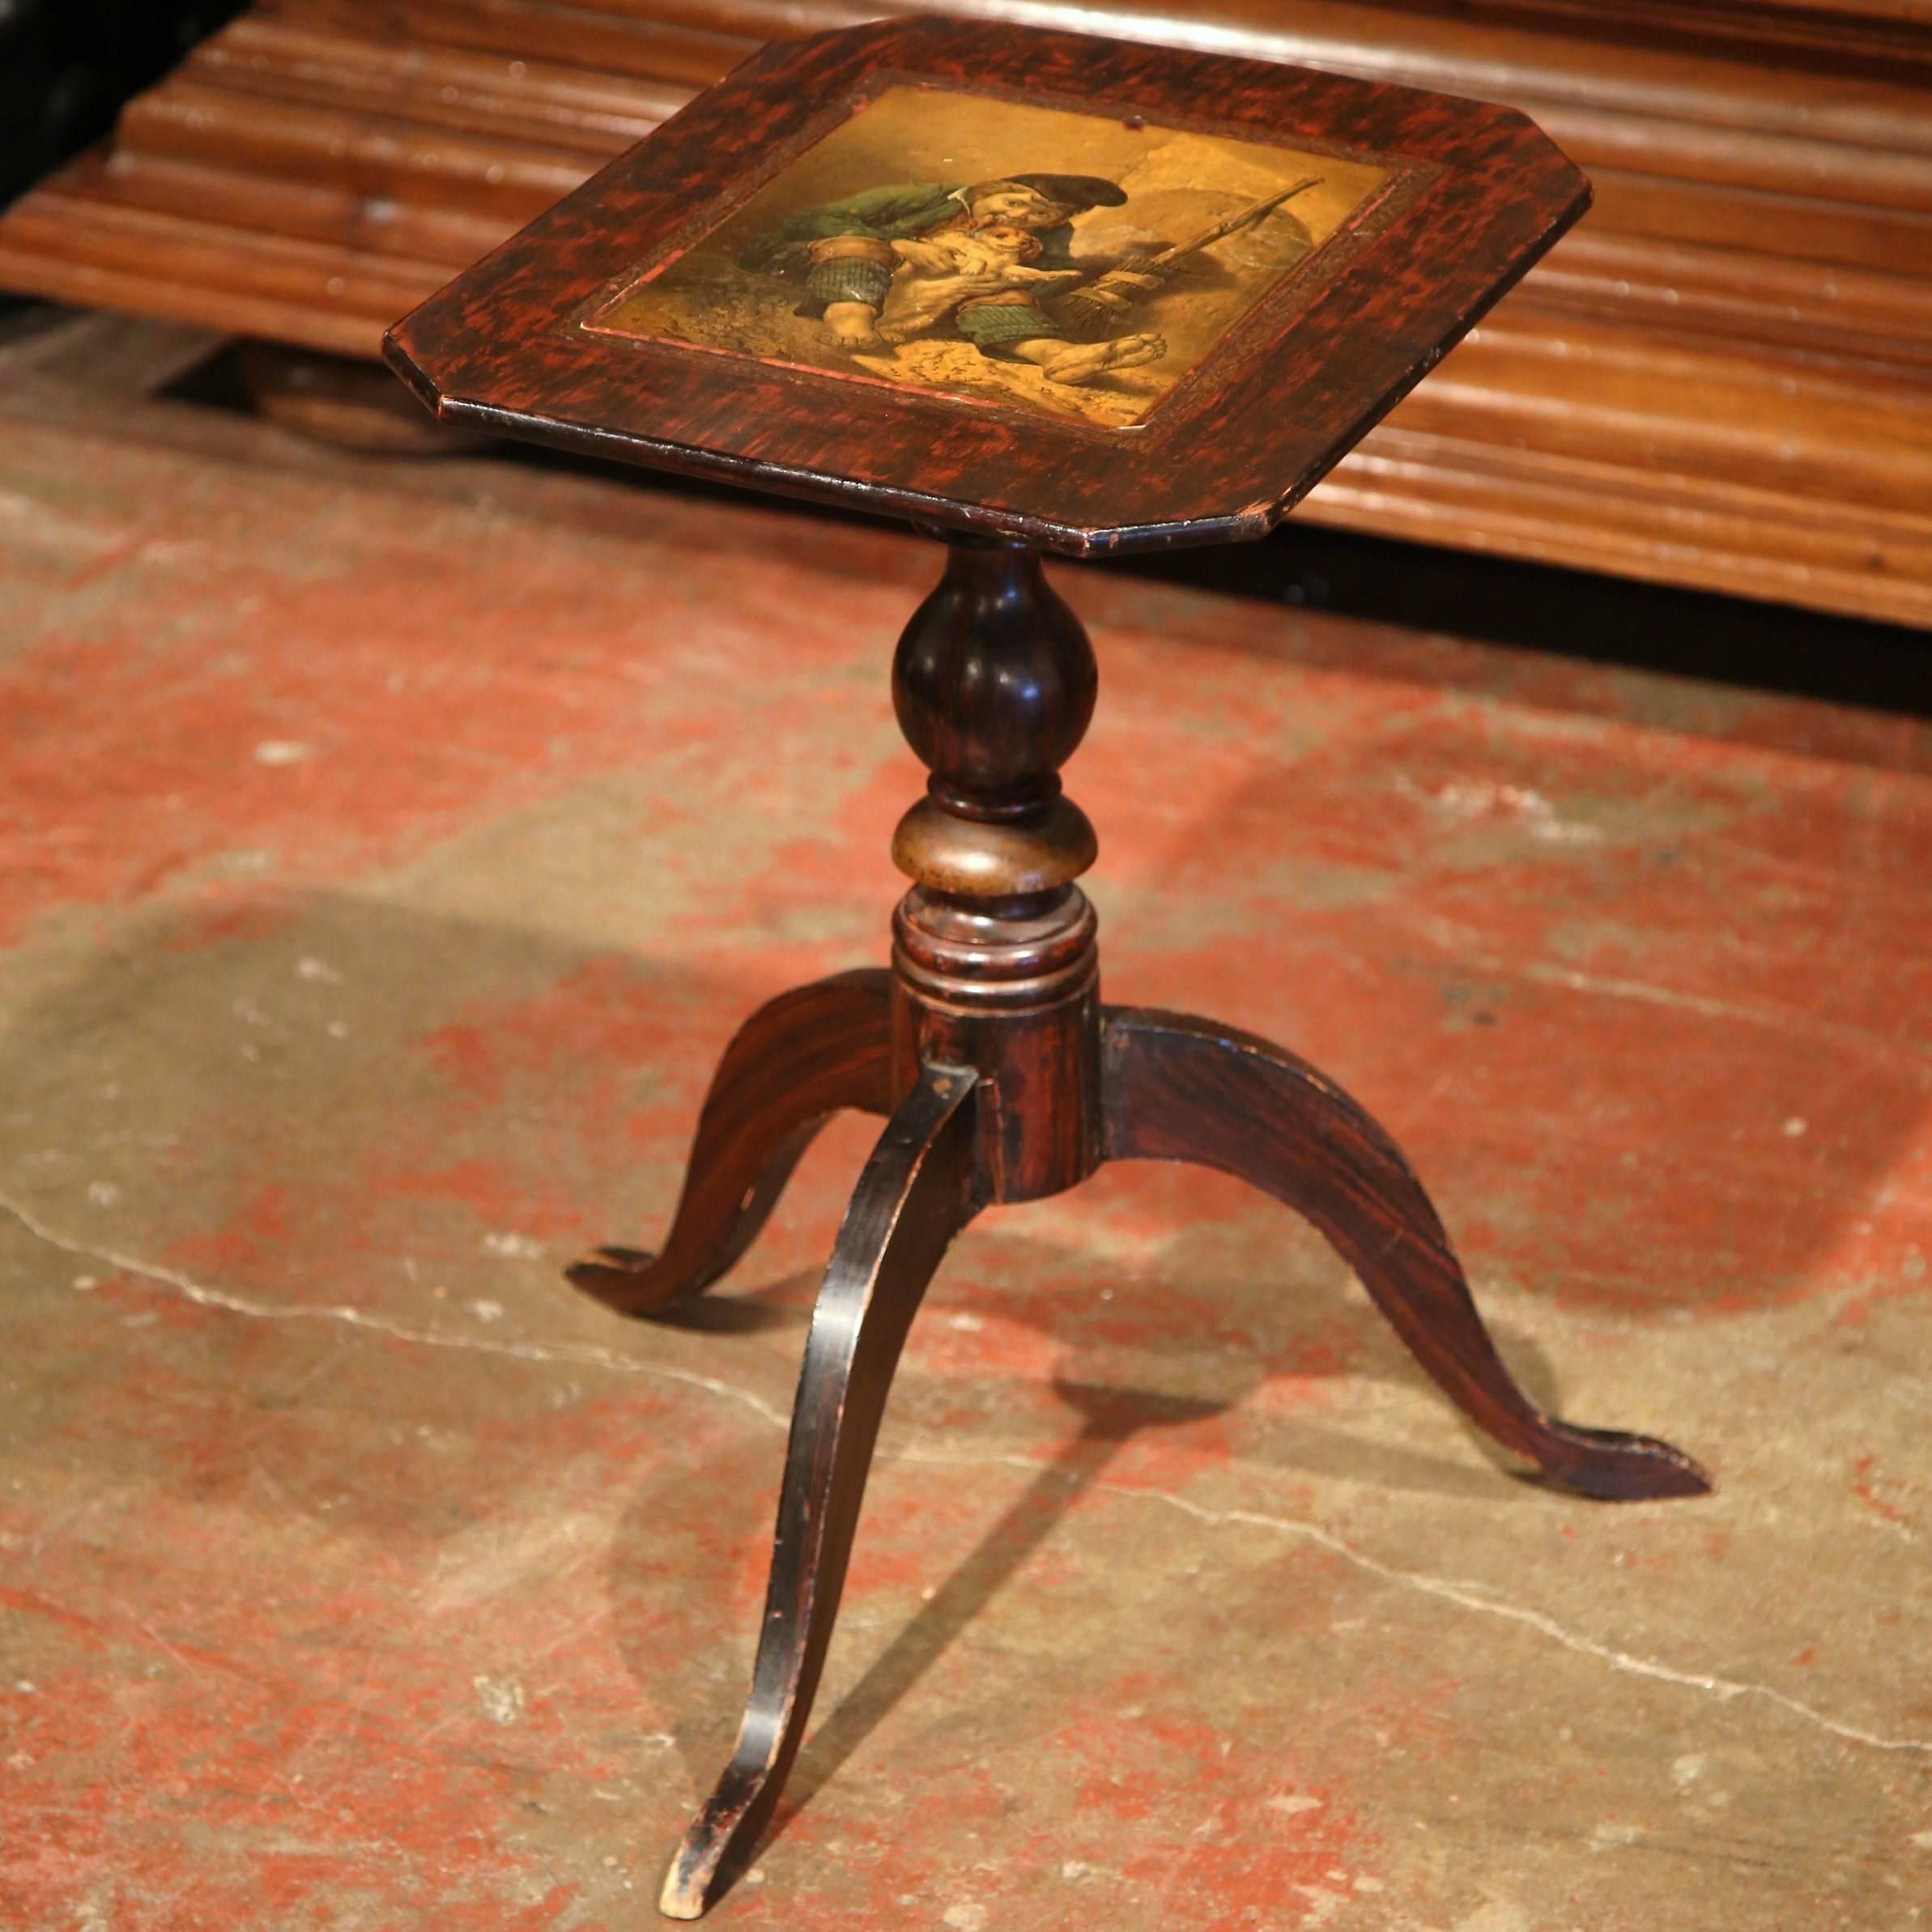 19th Century English Carved Mahogany Tea Table with Painted Scene on the Top 1